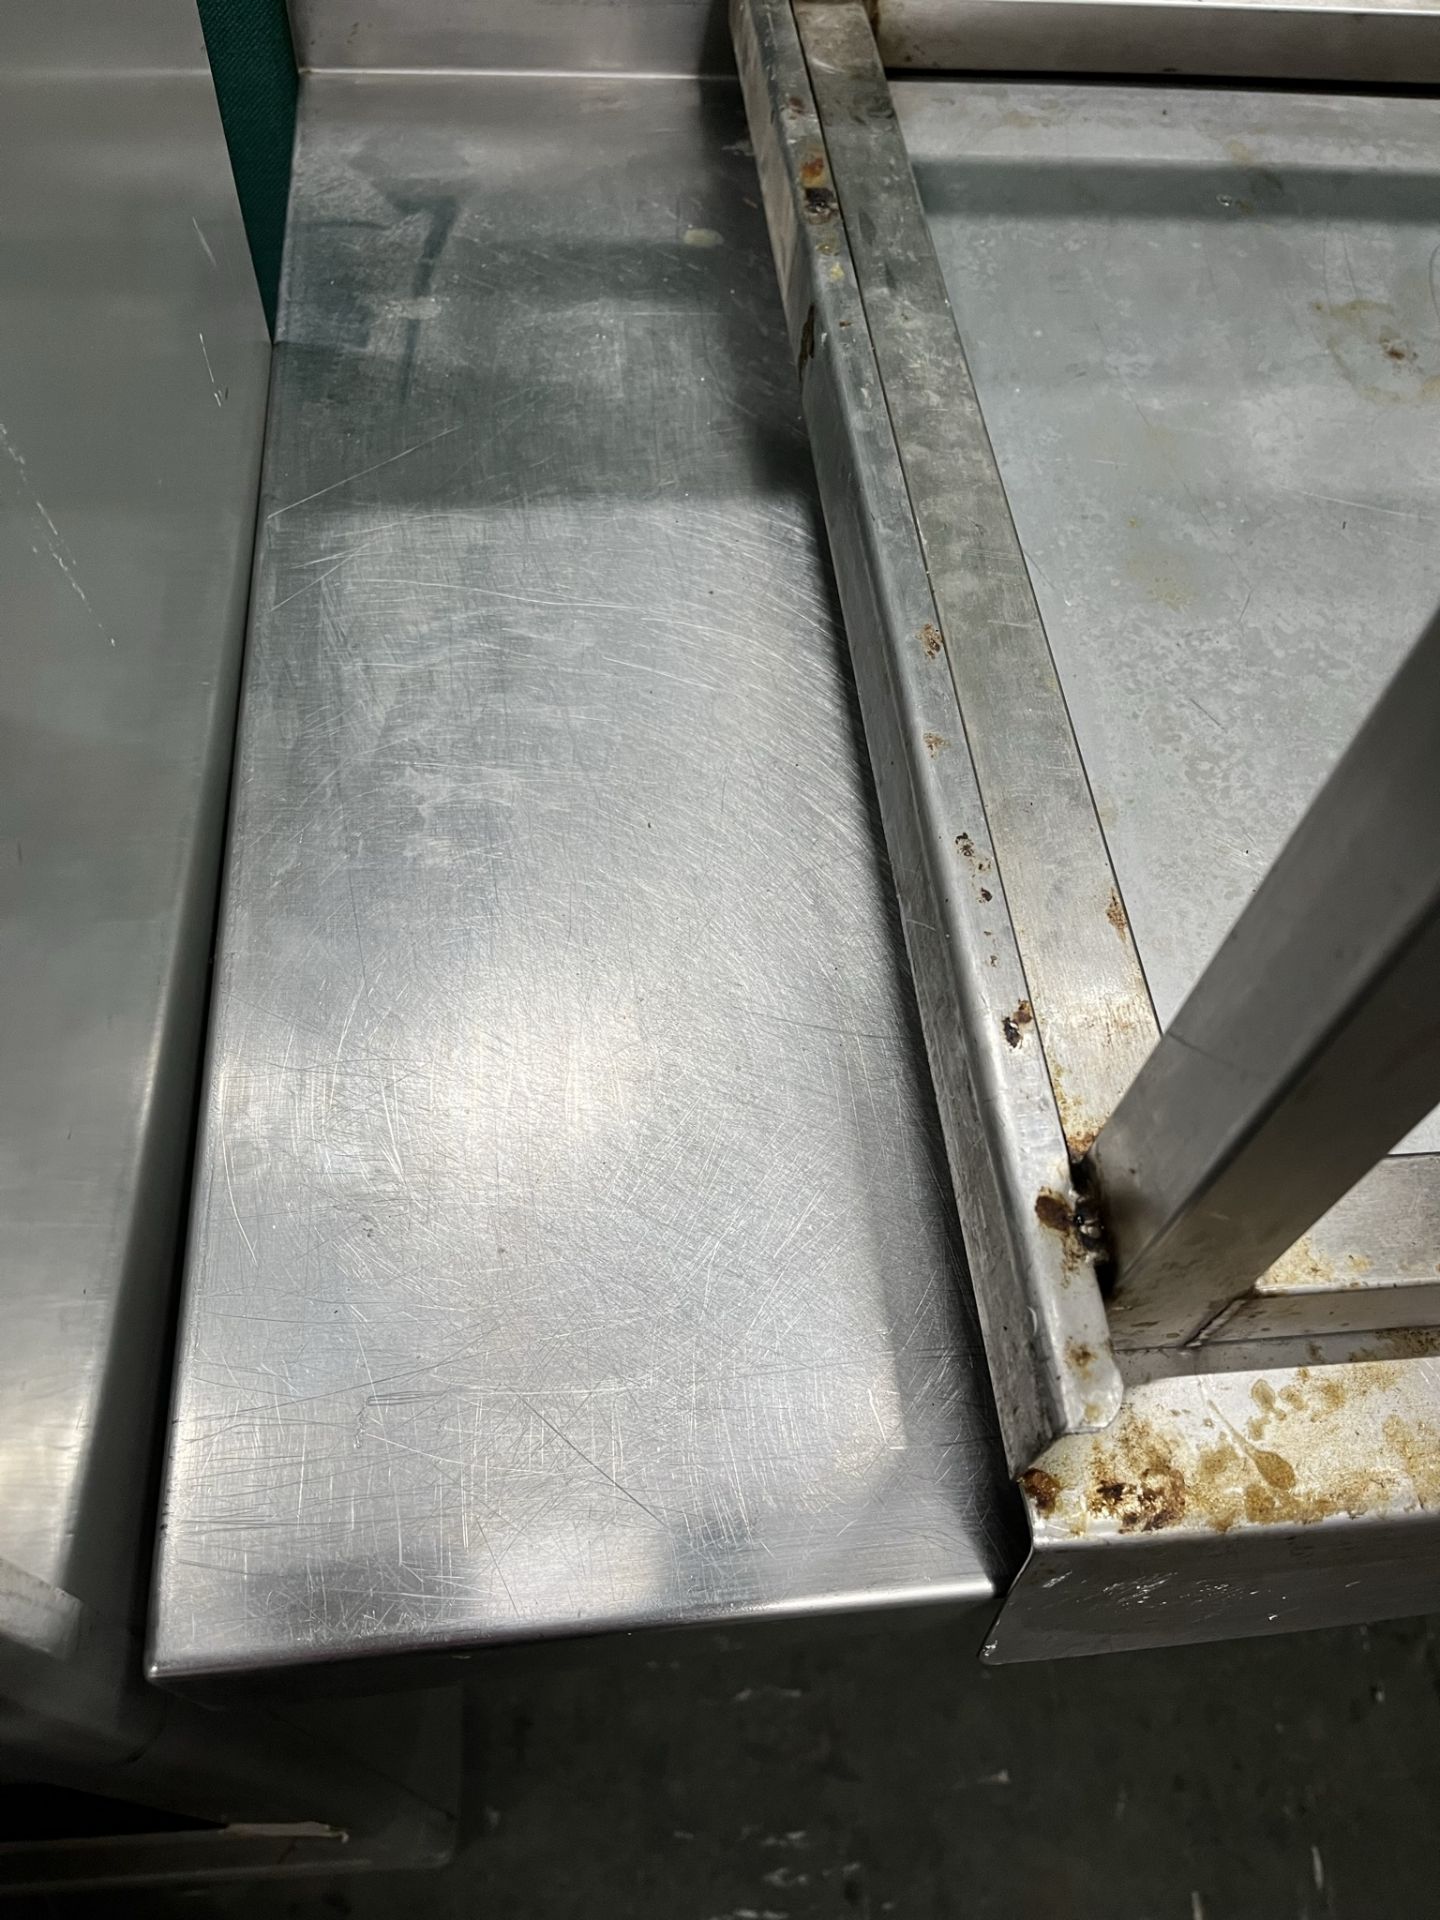 2 x Unbranded Stainless Steel Preparation Tables - Image 3 of 3